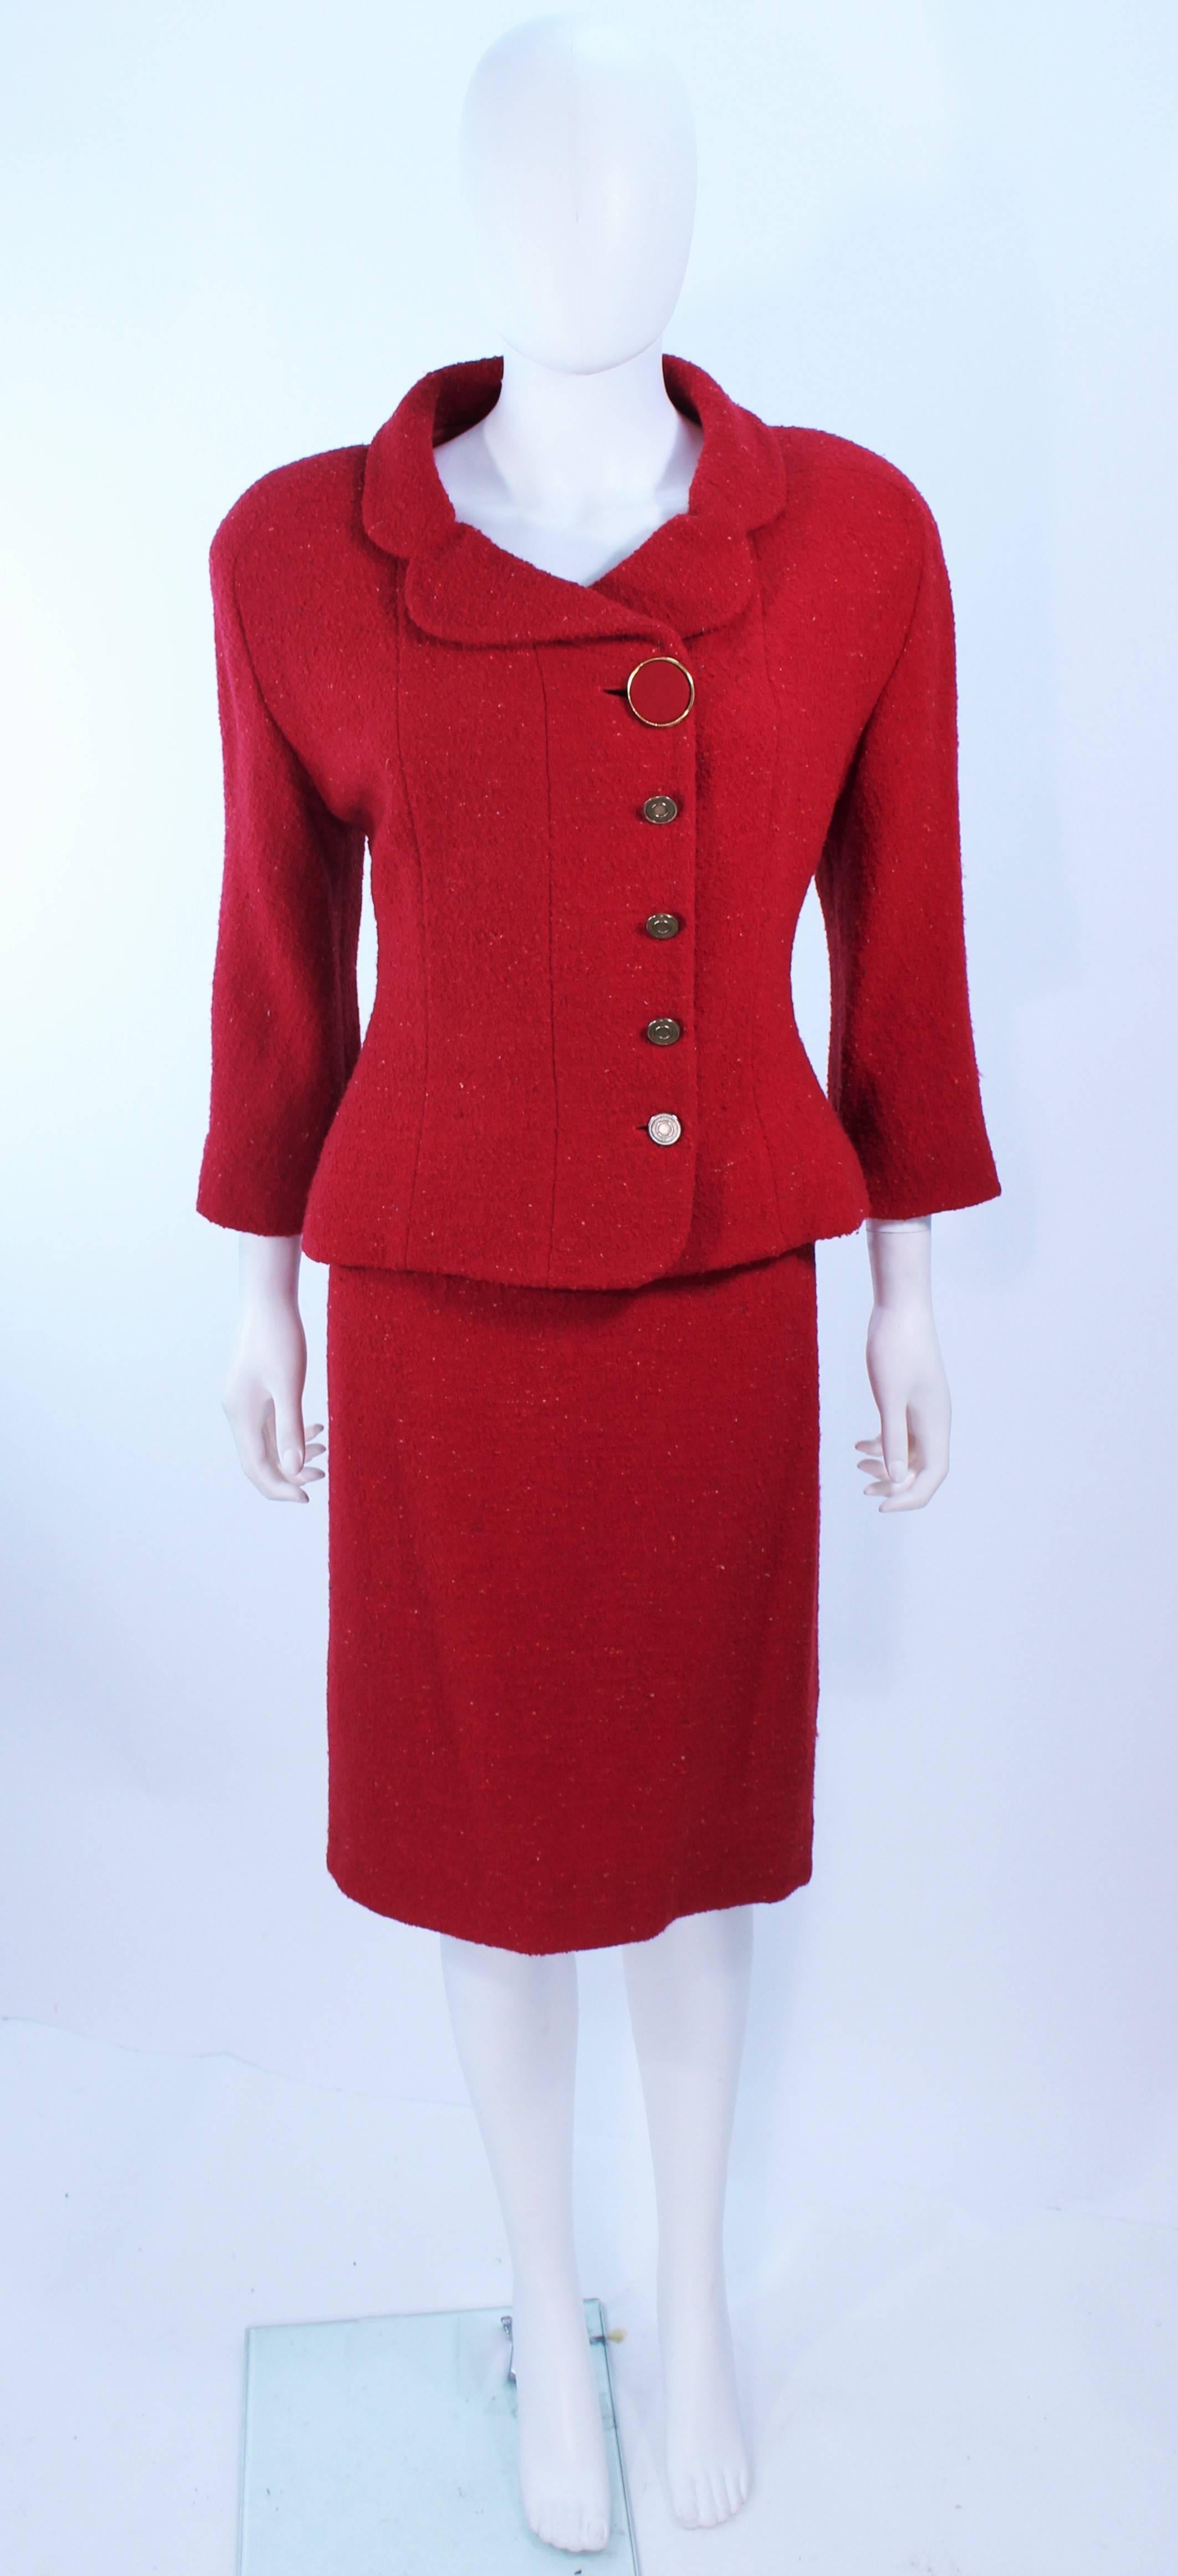 This Karl Lagerfeld suit is composed of a red boucle. The jacket features a large collar with center front button closures and a double breasted style. The skirt has a classic pencil style with a zipper closure. In excellent vintage